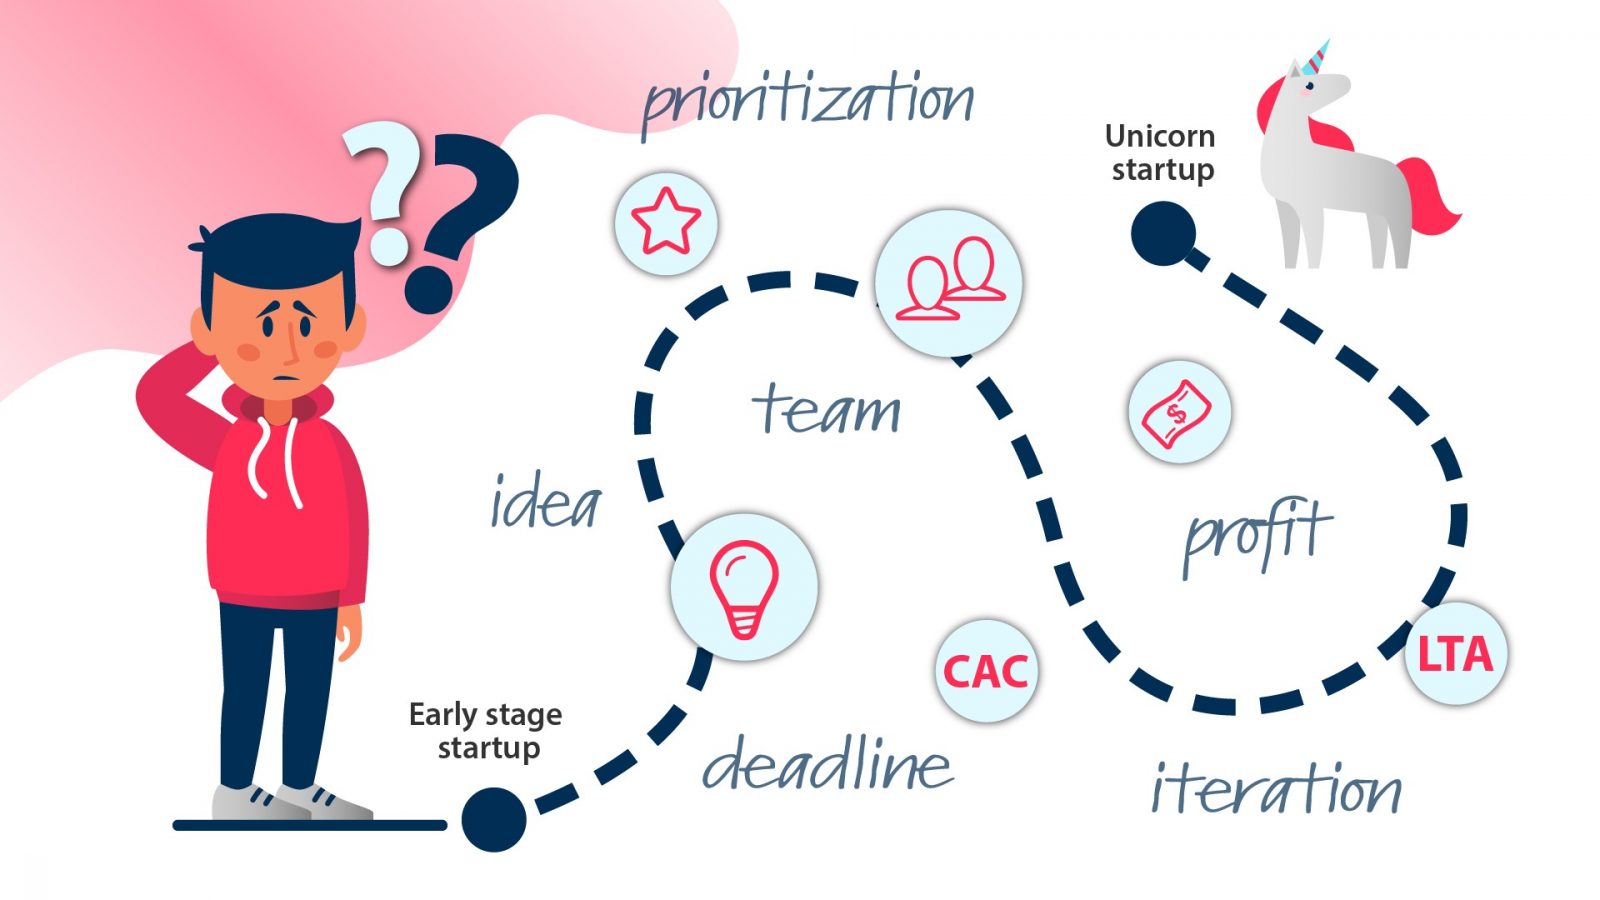 This image demonstrates a startup scalling journey map